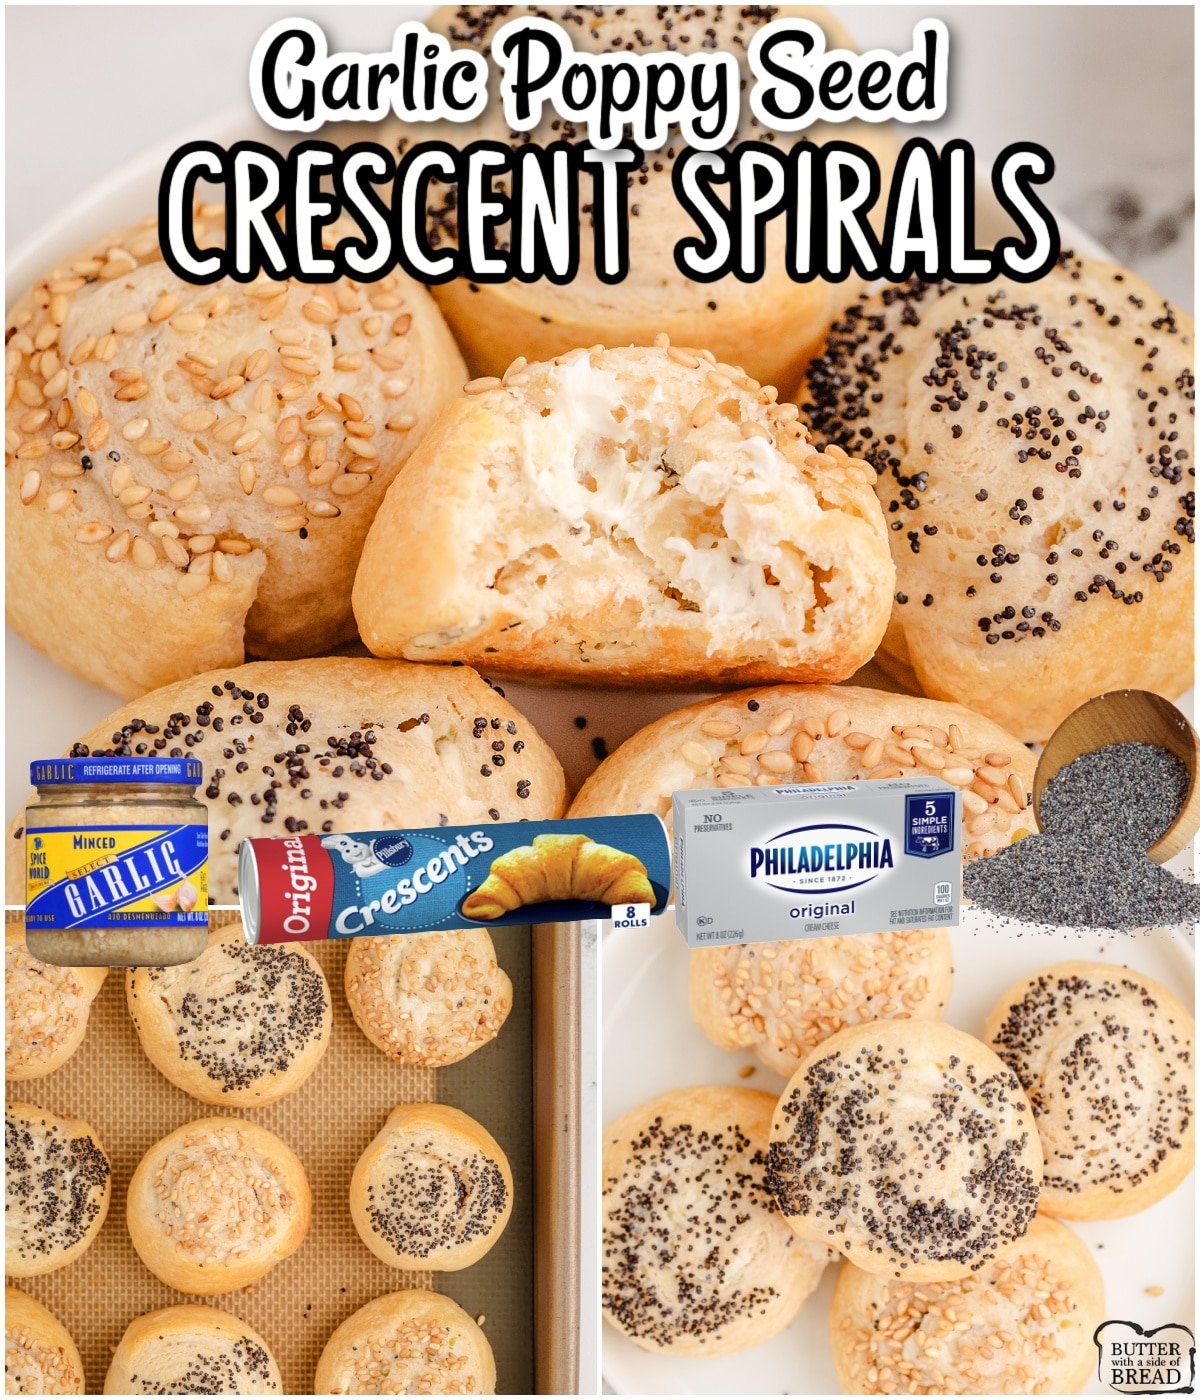 Garlic Poppy Seed Spirals are a delicious appetizer perfect for any occasion! Crescent rolls filled with garlic cream cheese & rolled in poppy or sesame seeds are a flavorful hors d'oeuvres everyone loves!